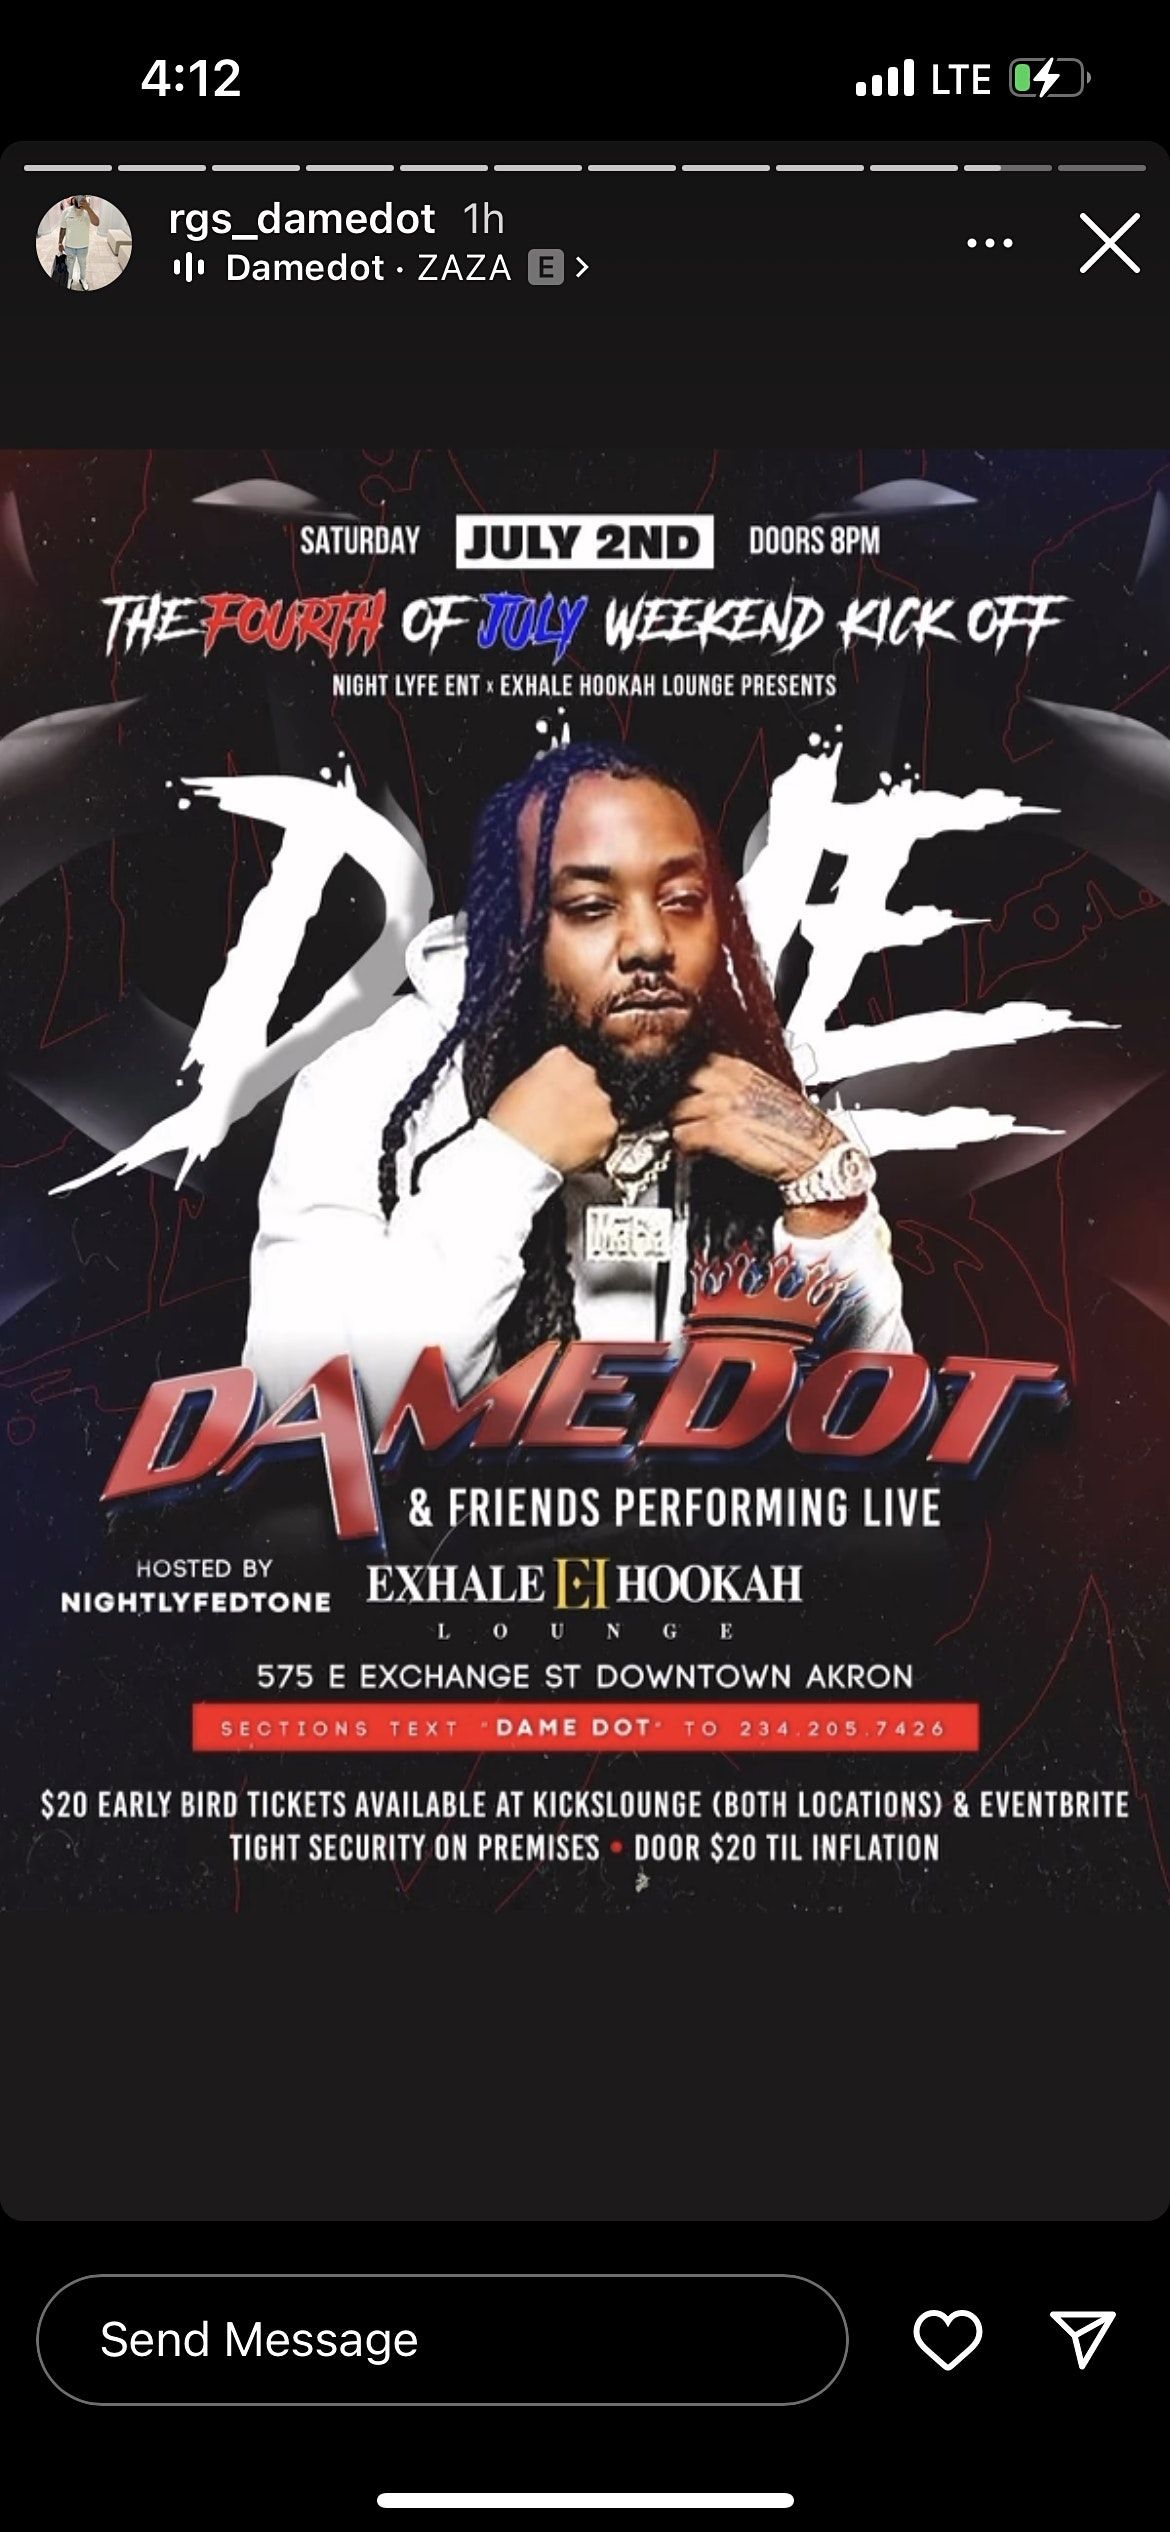 DAME DOT & FRIENDS PERFORMING LIVE AT EXHALE JULY 2ND